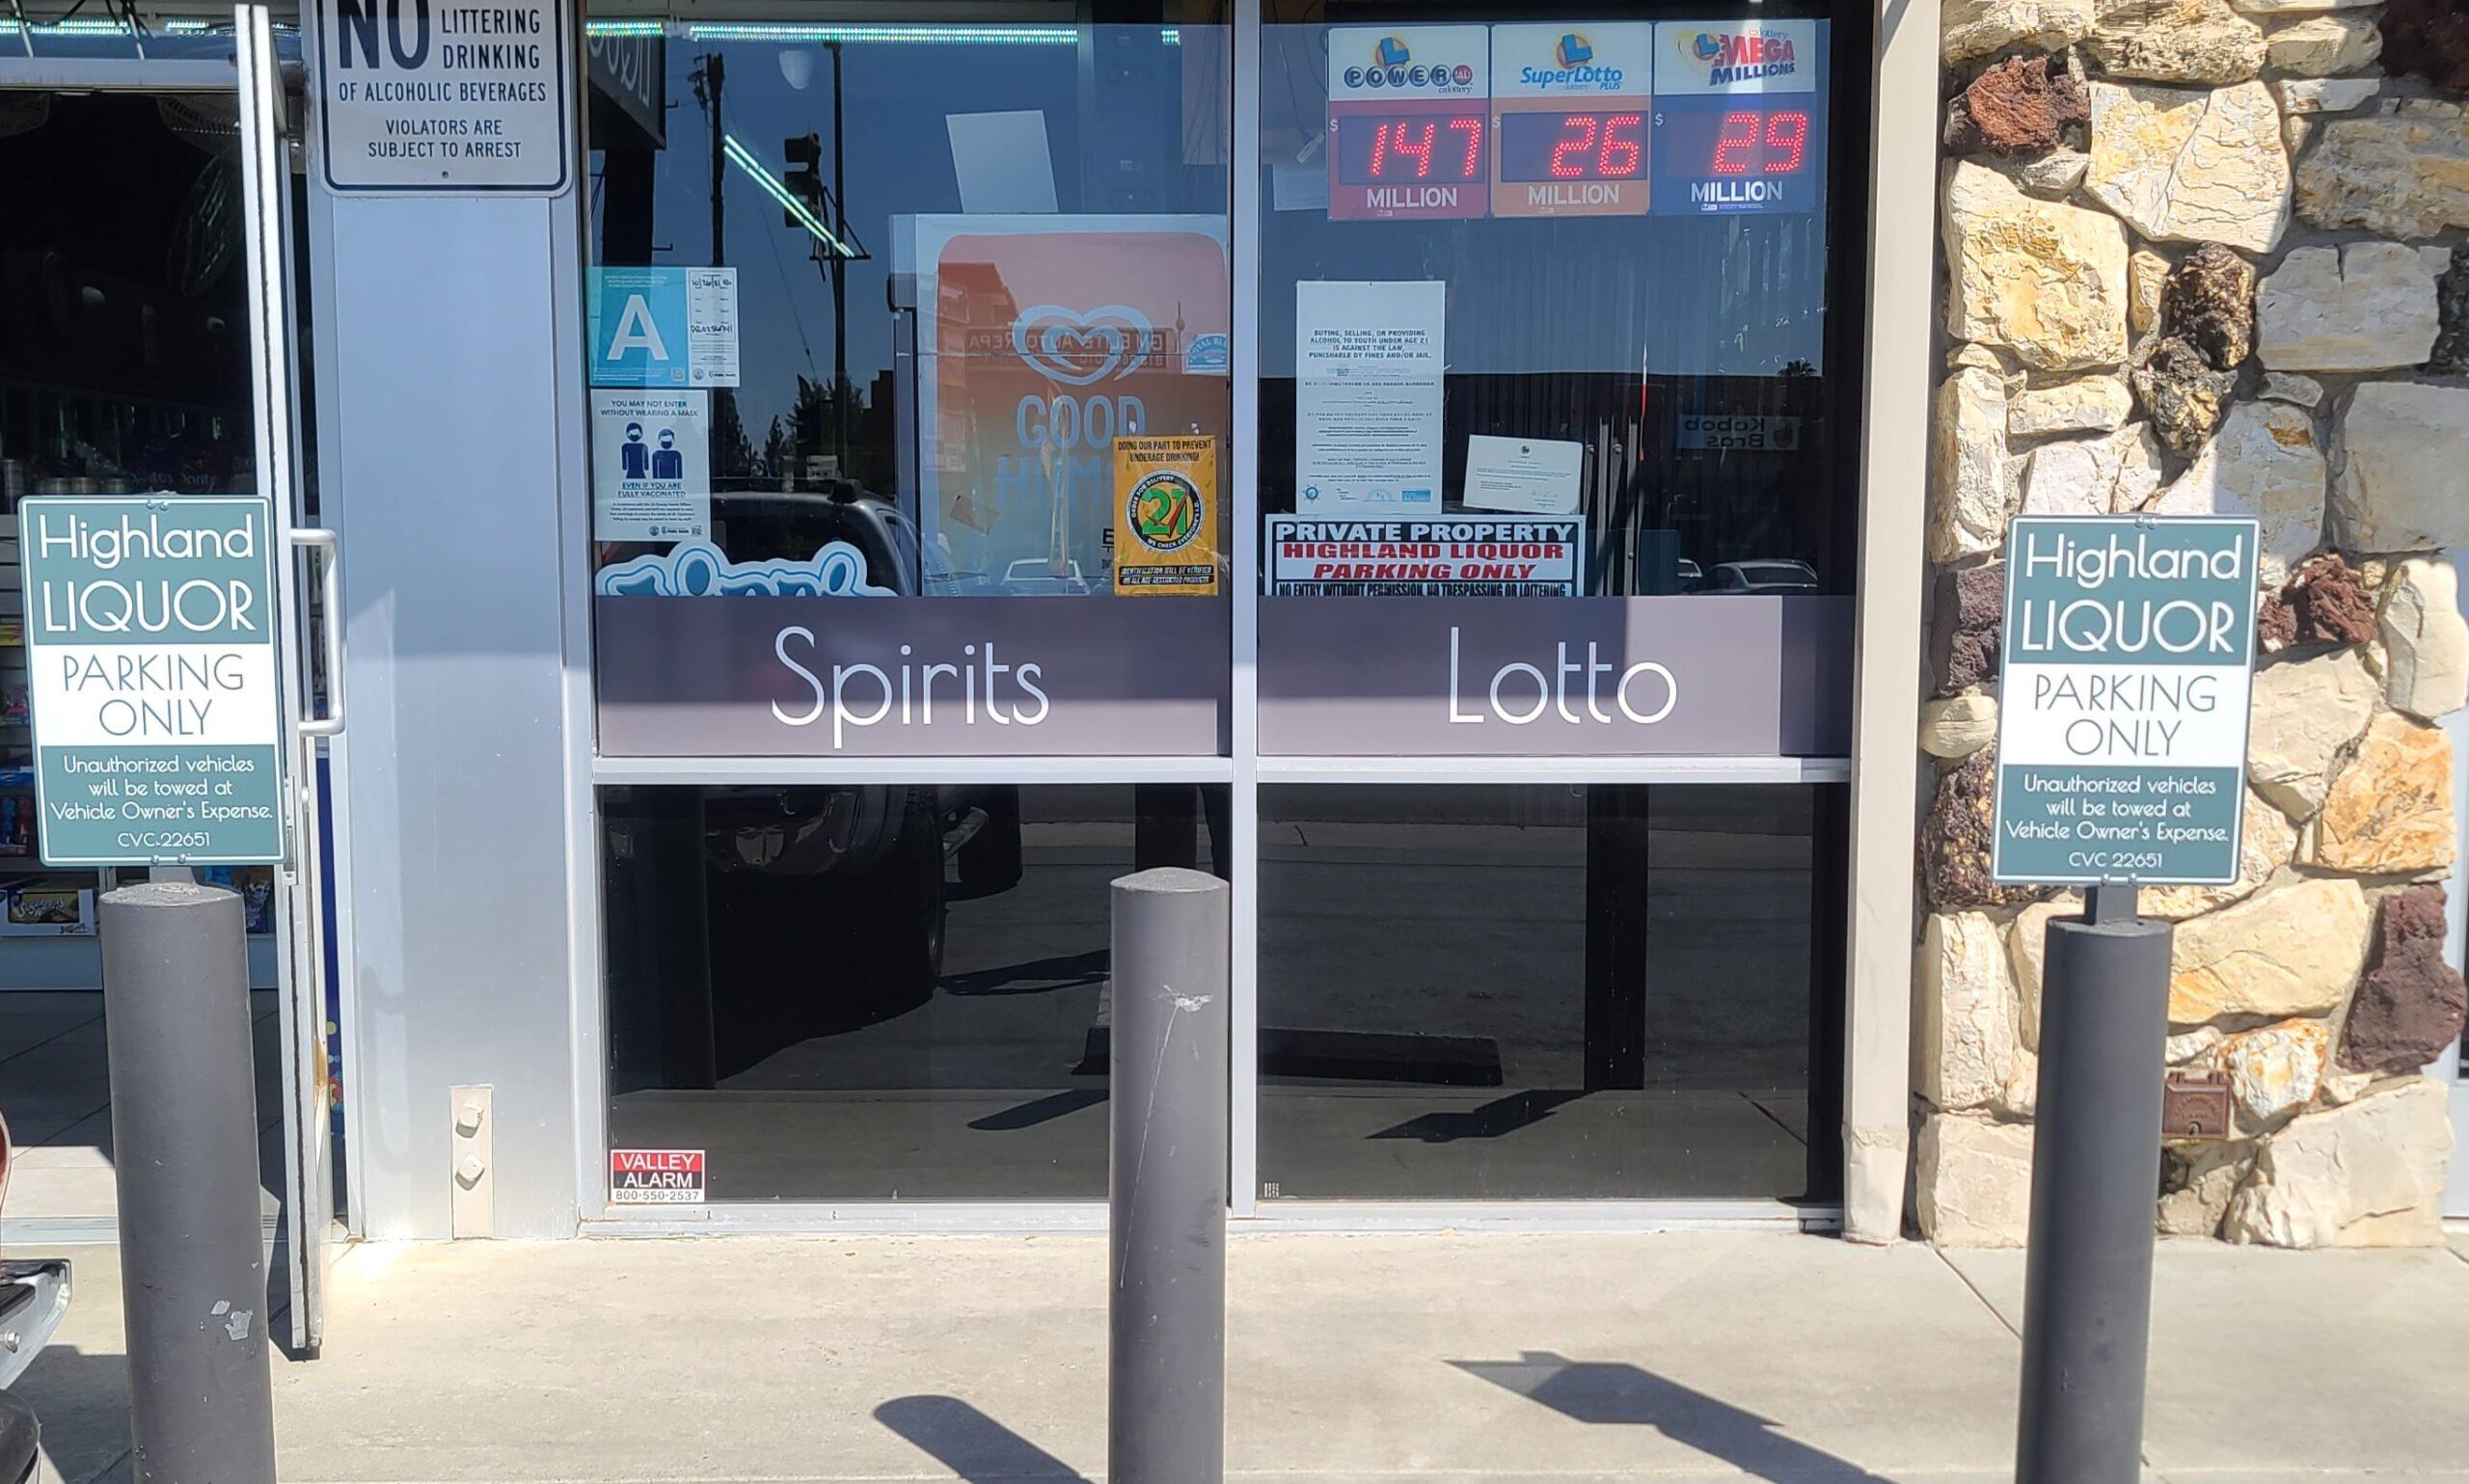 You are currently viewing Parking Lot Aluminum Signs for Highland Liquor in Granada Hills